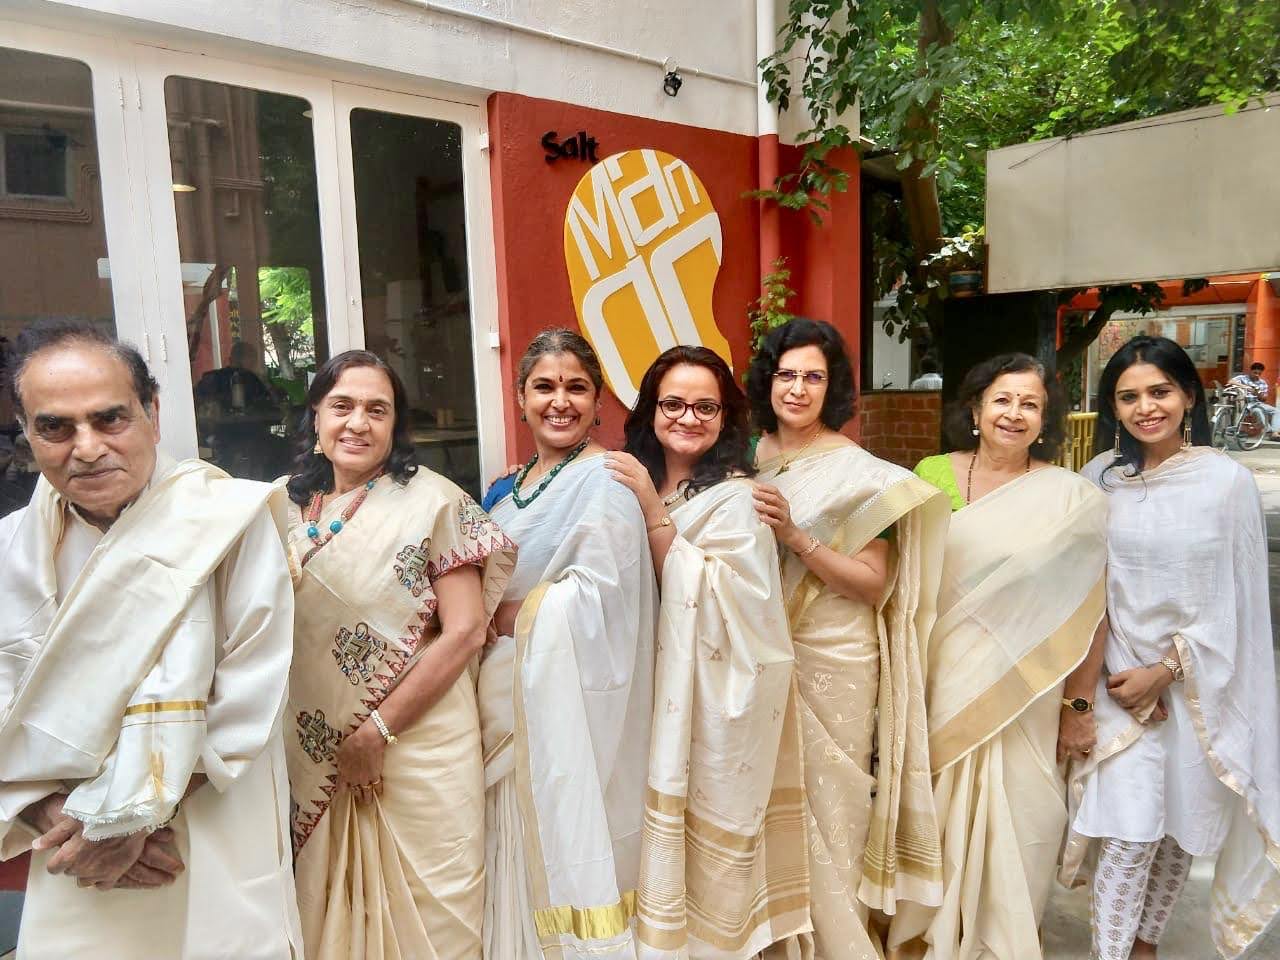 Some Silver Talkies members with white dresscode